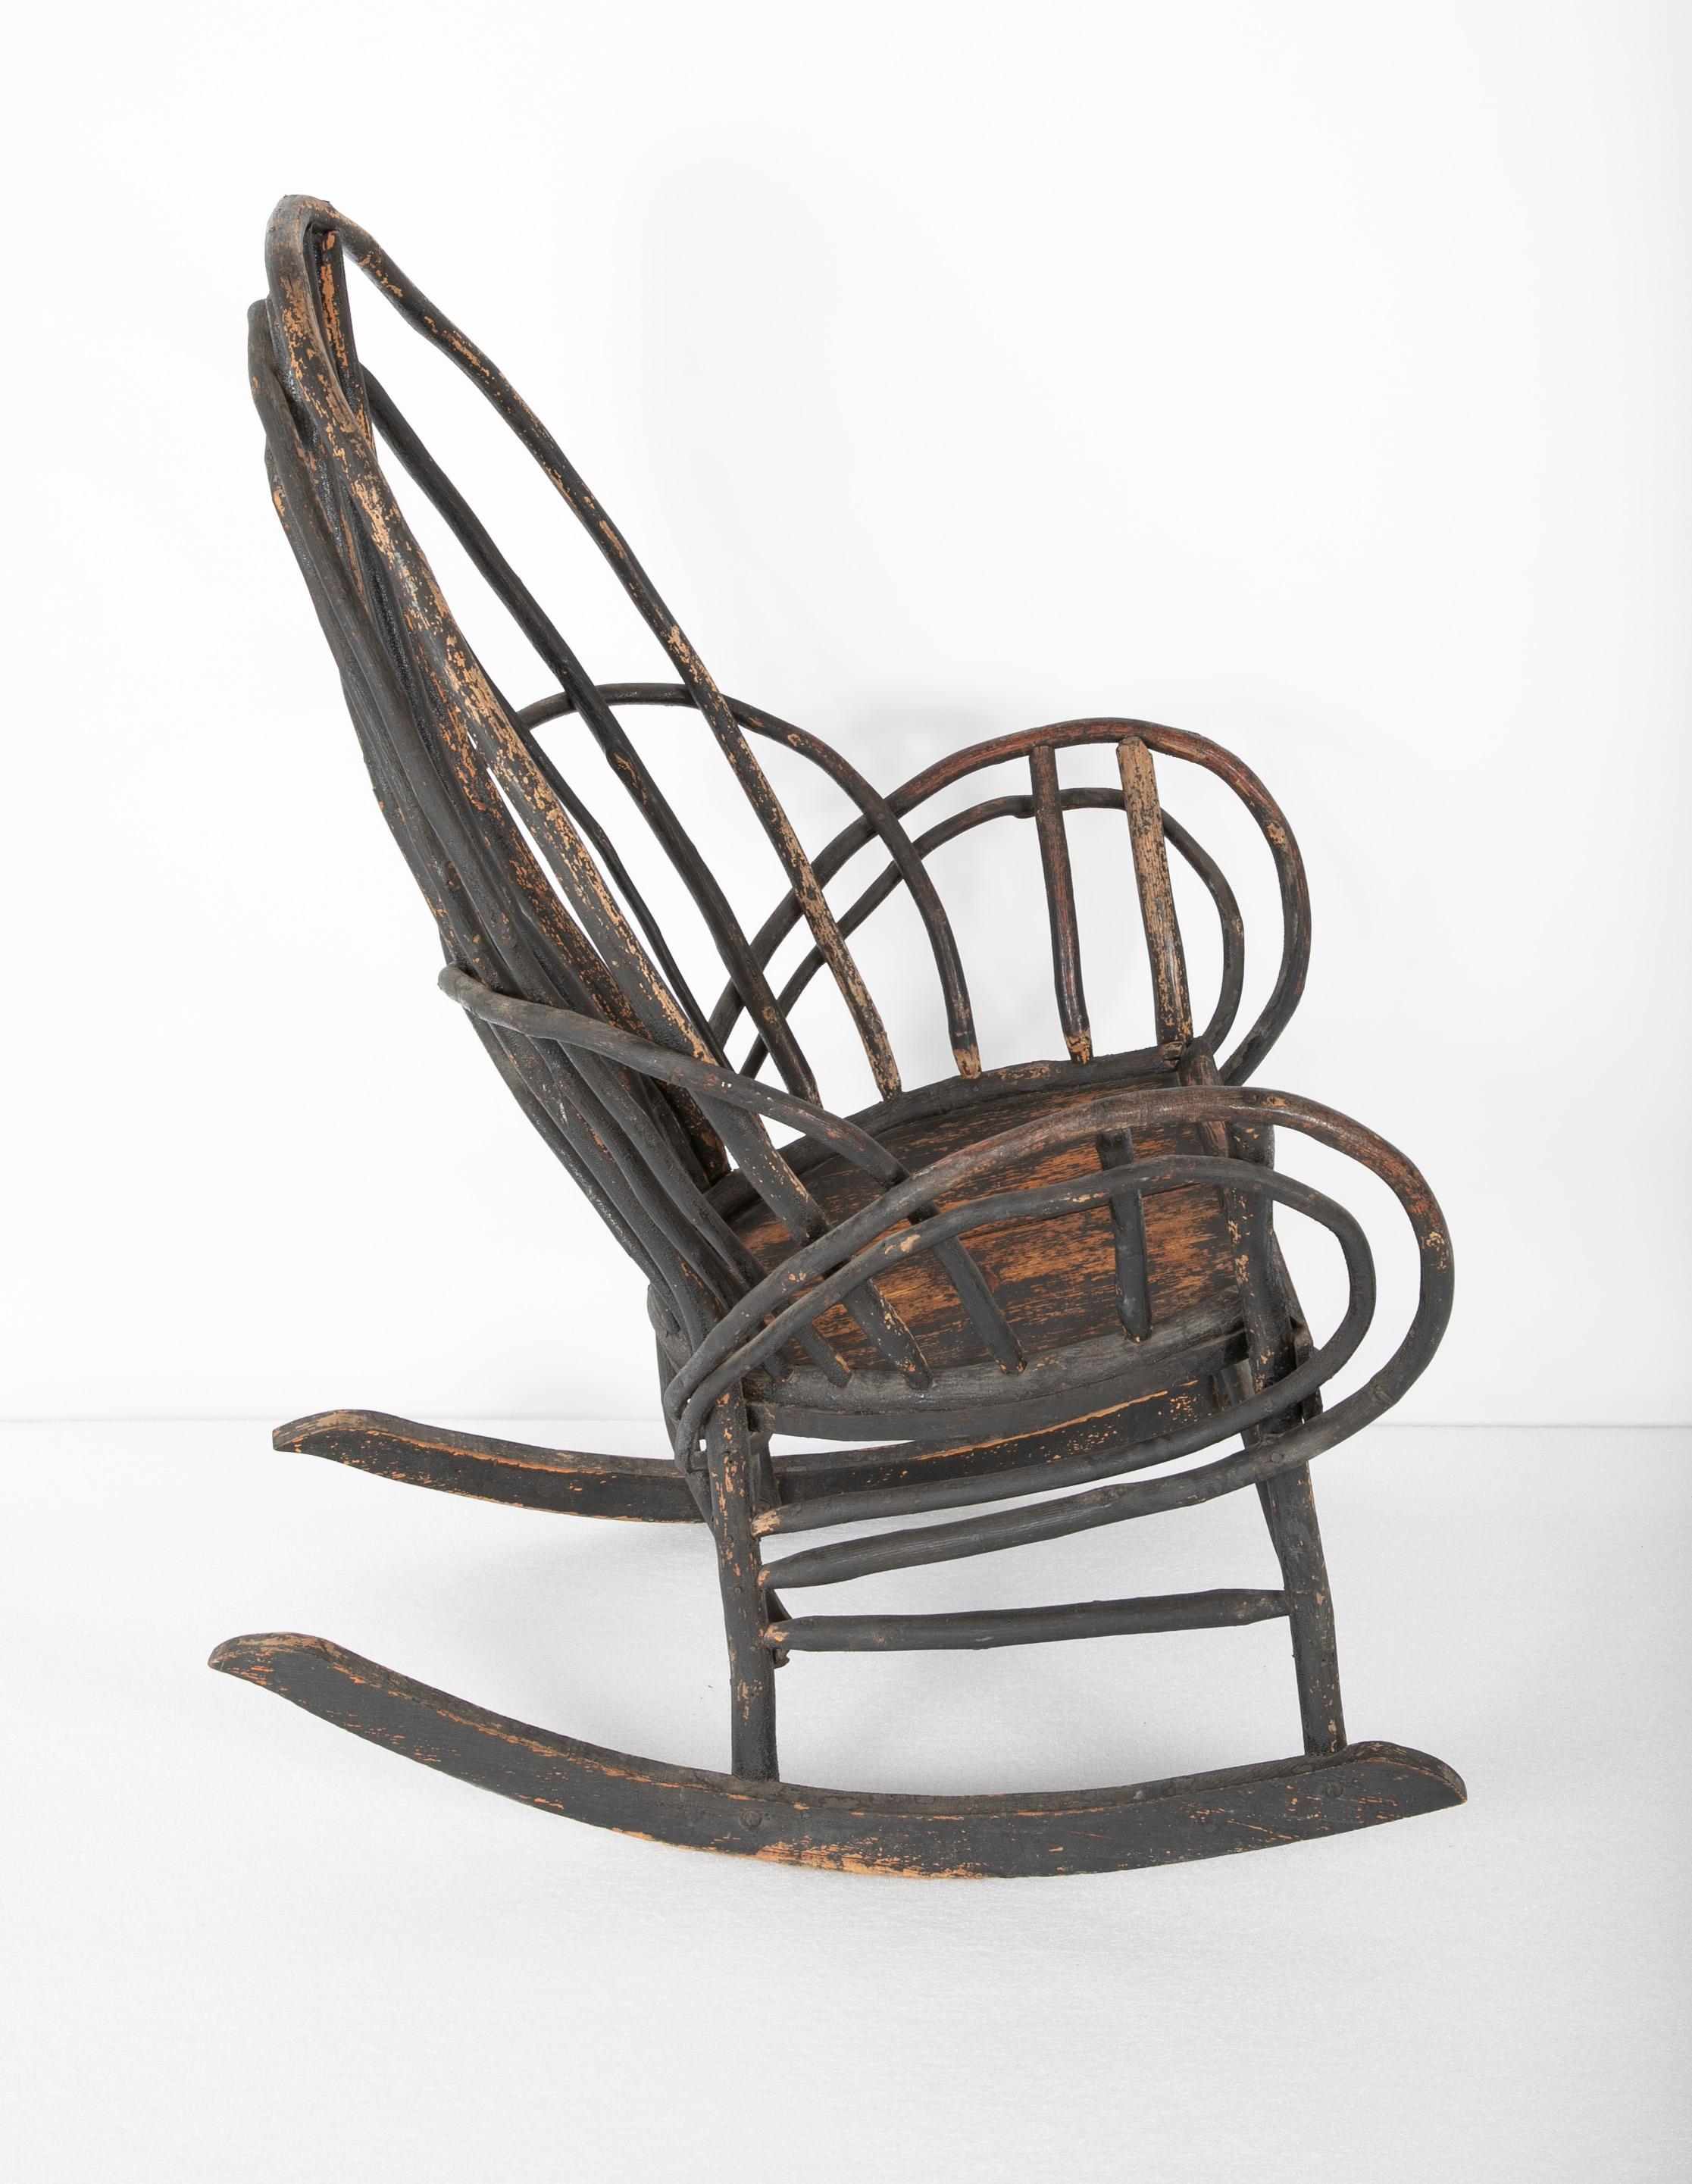 Bentwood Rustic Armchair-Rocker with Plank Seat & Traces of Early Black Paint 1